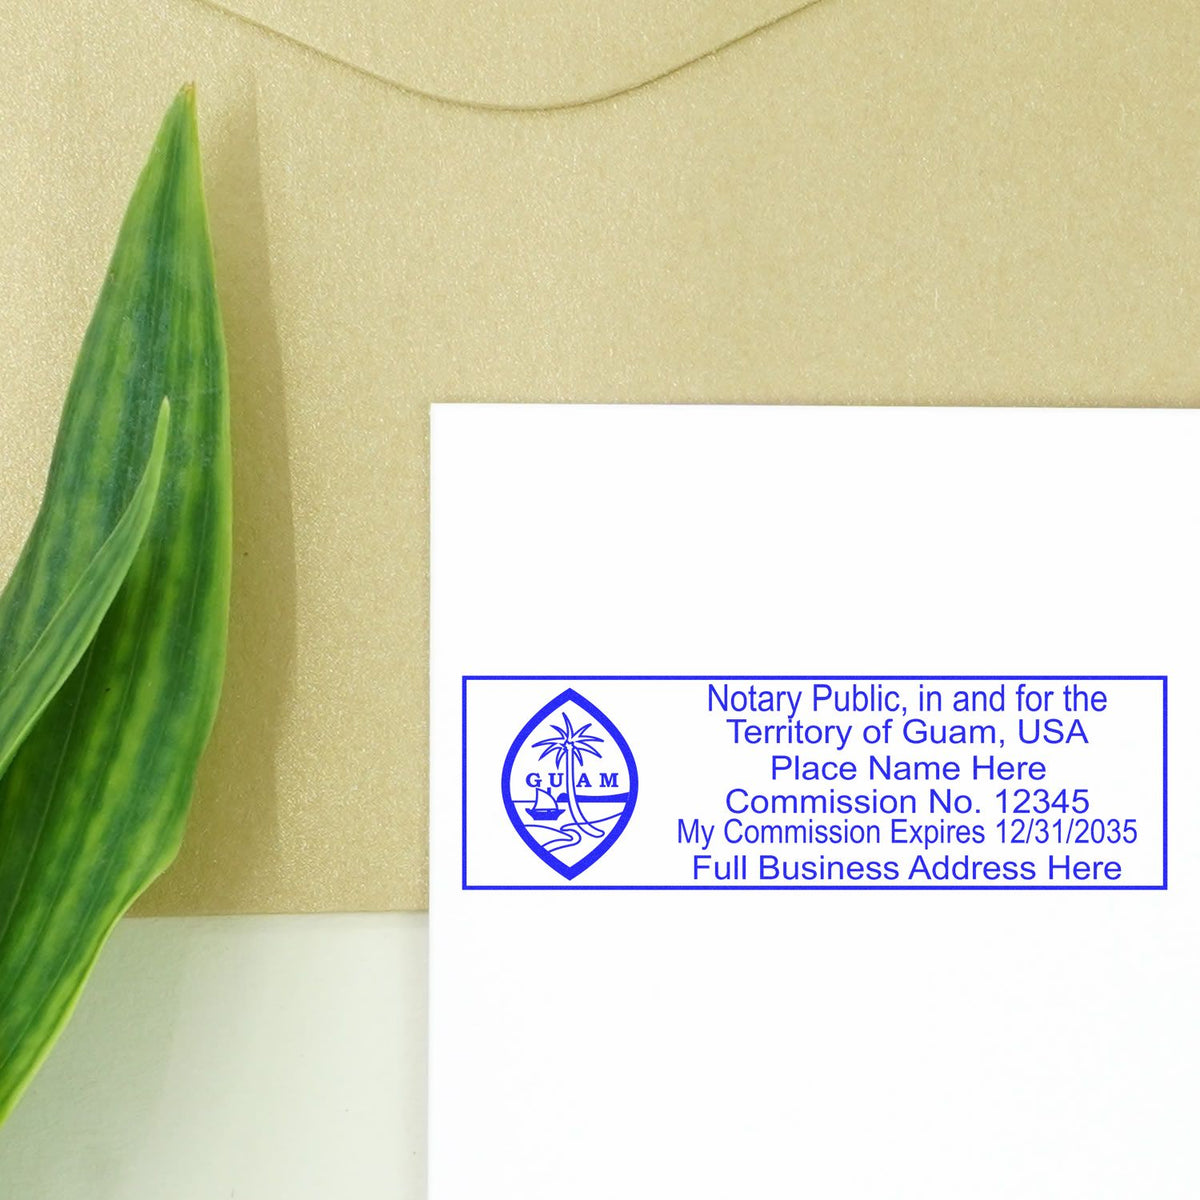 A photograph of the Self-Inking Rectangular Guam Notary Stamp stamp impression reveals a vivid, professional image of the on paper.